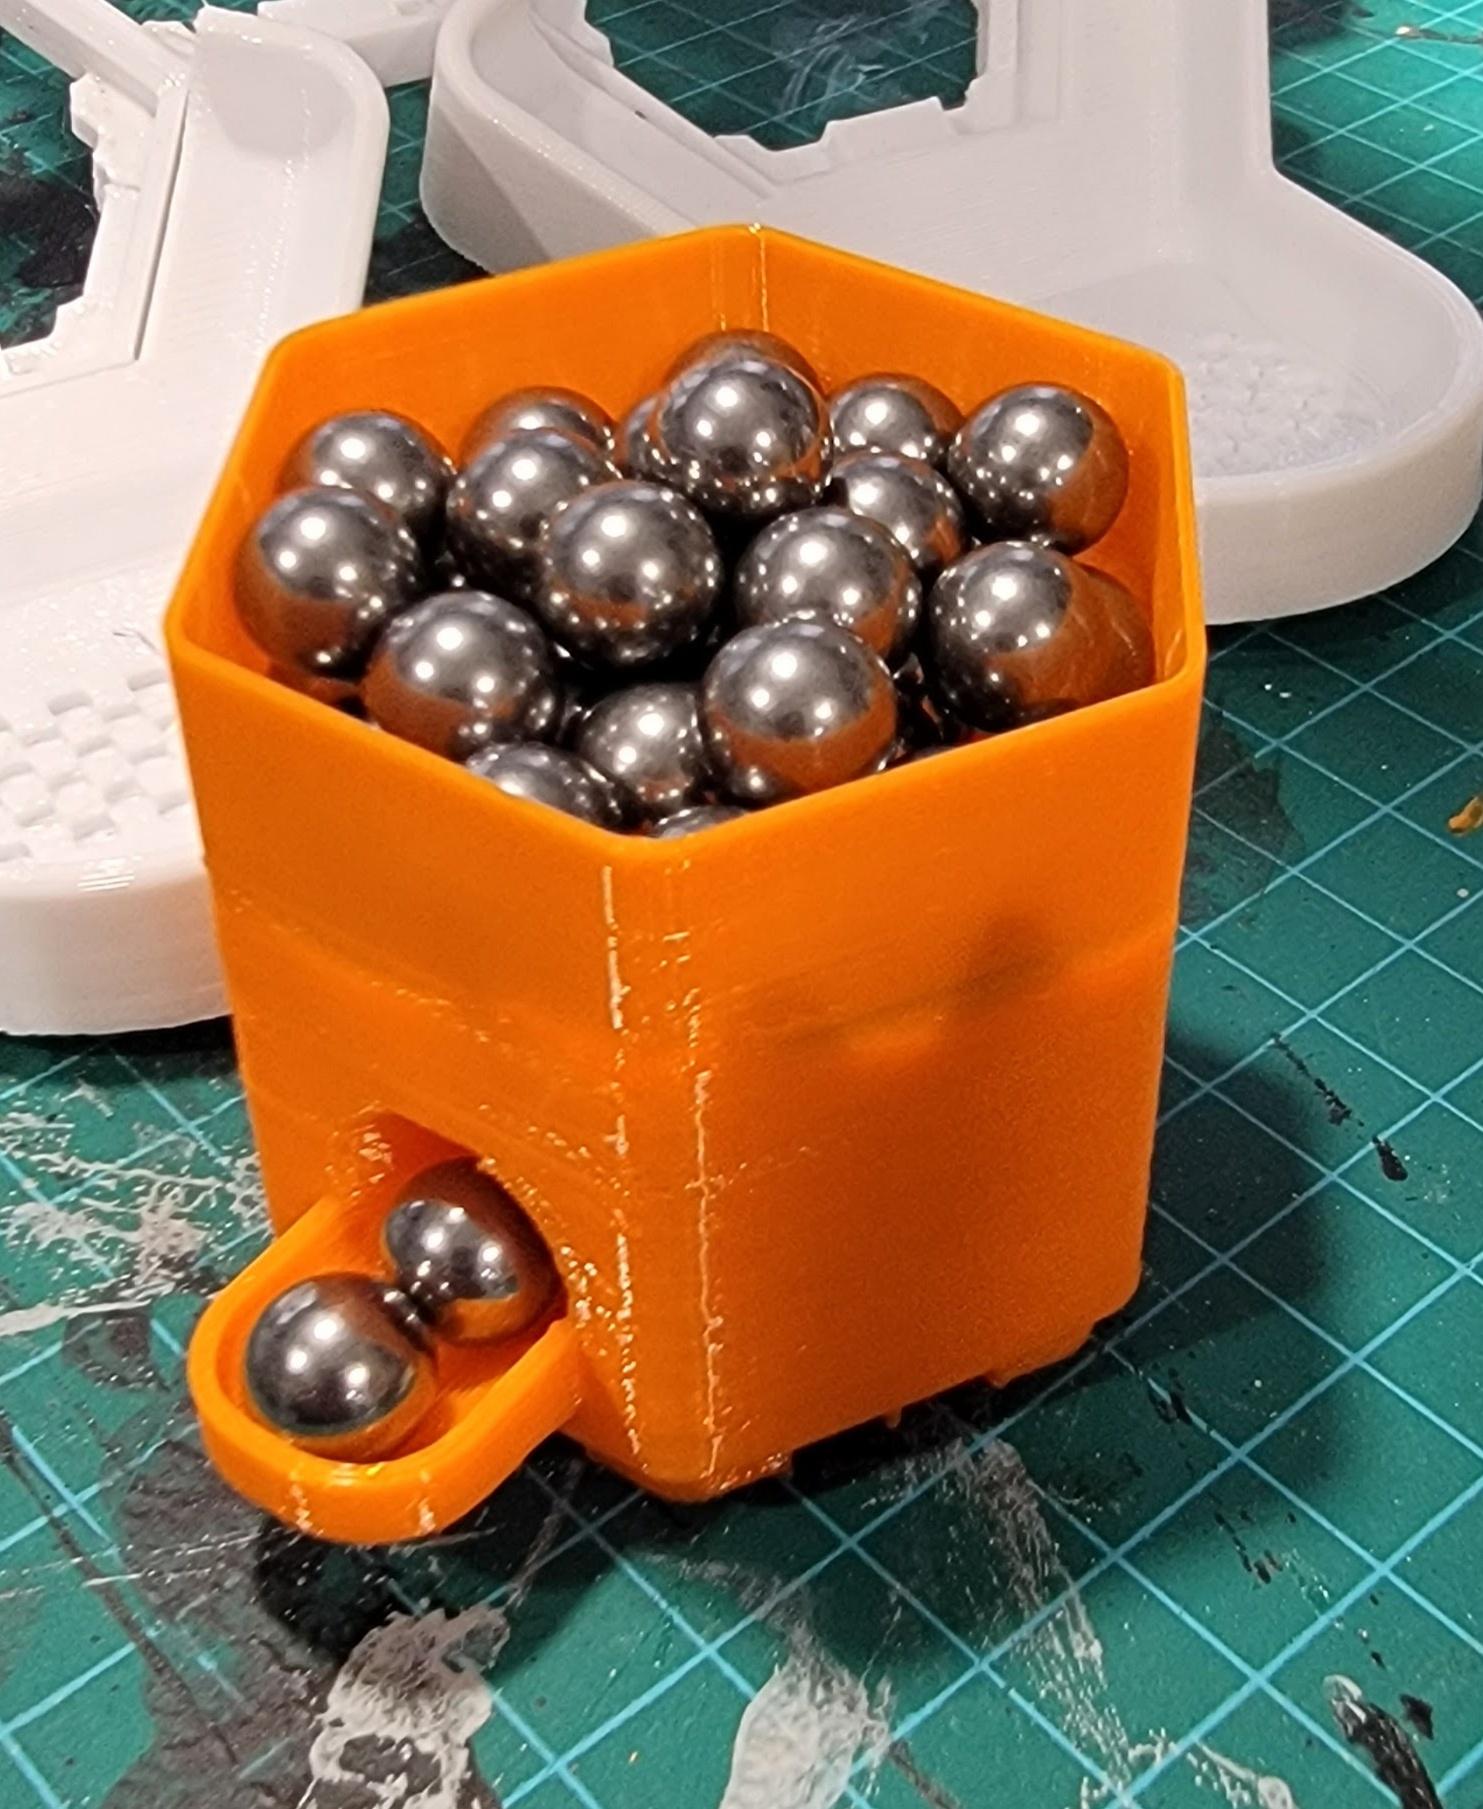 Hextraction Tile Ball Holder - Give it a shake once a while to get the flow going, but works great otherwise. Nice easy print! - 3d model